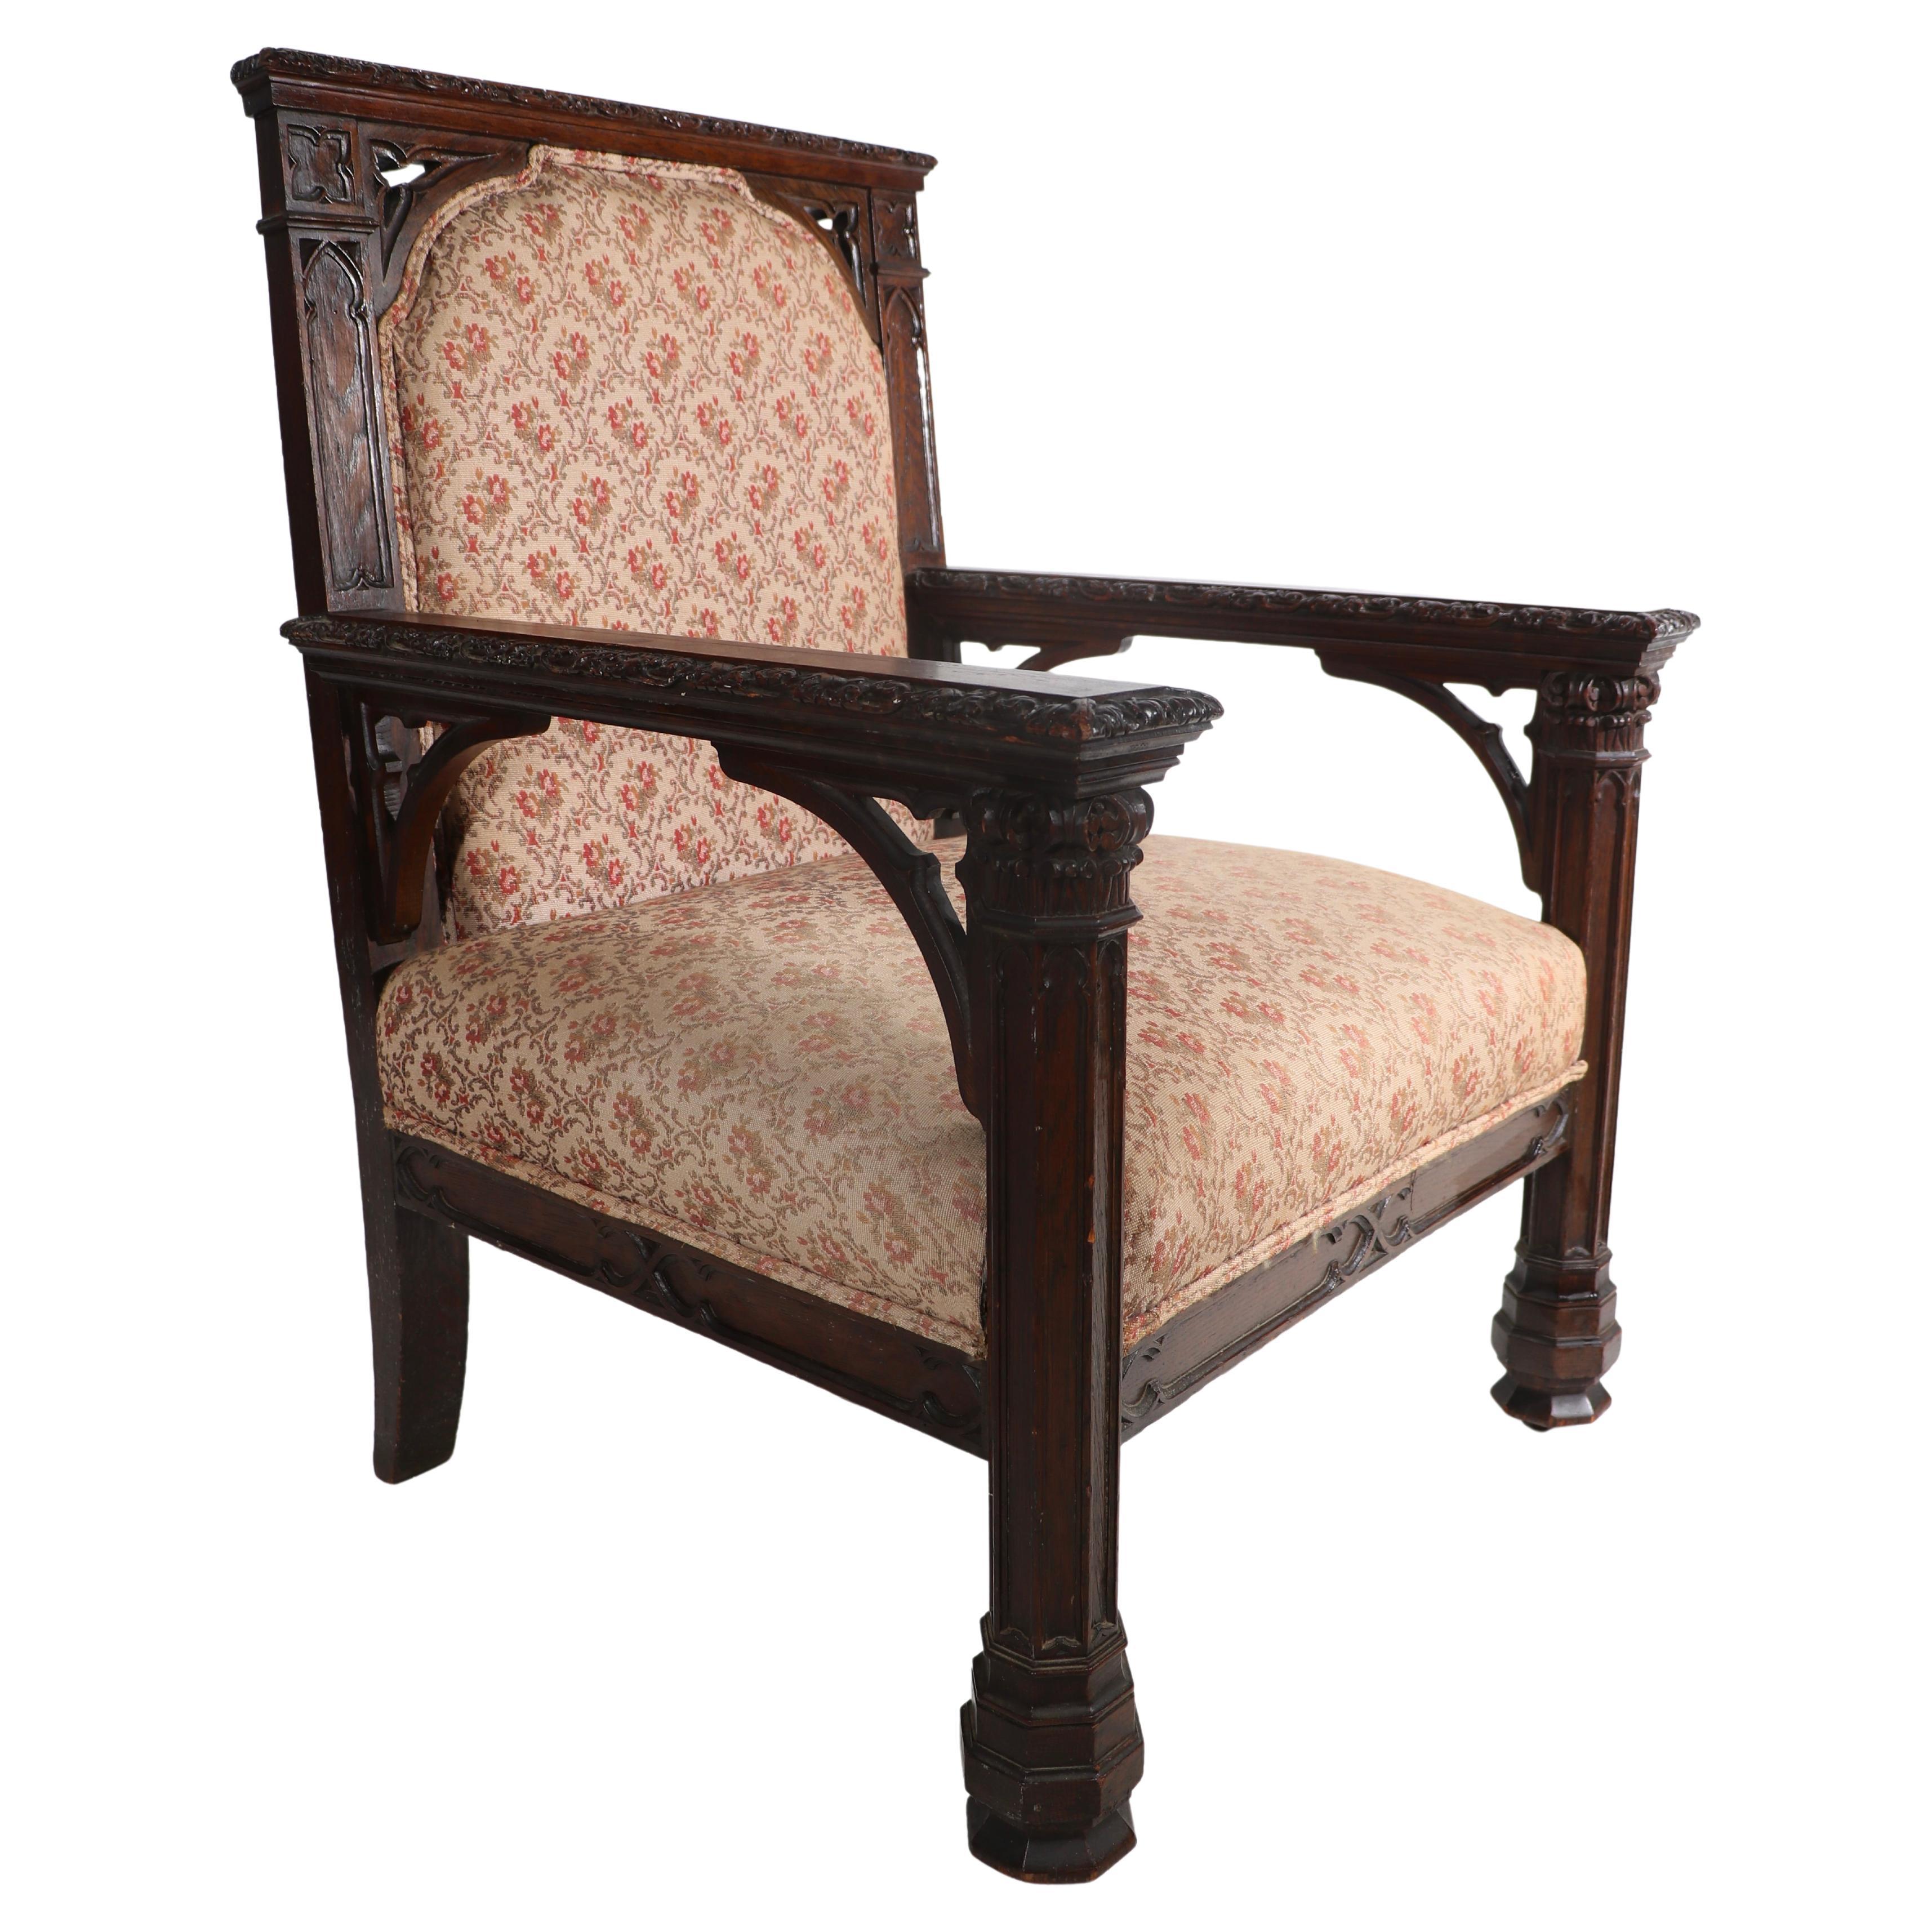 Oversized Gothic Revival Throne Armchair